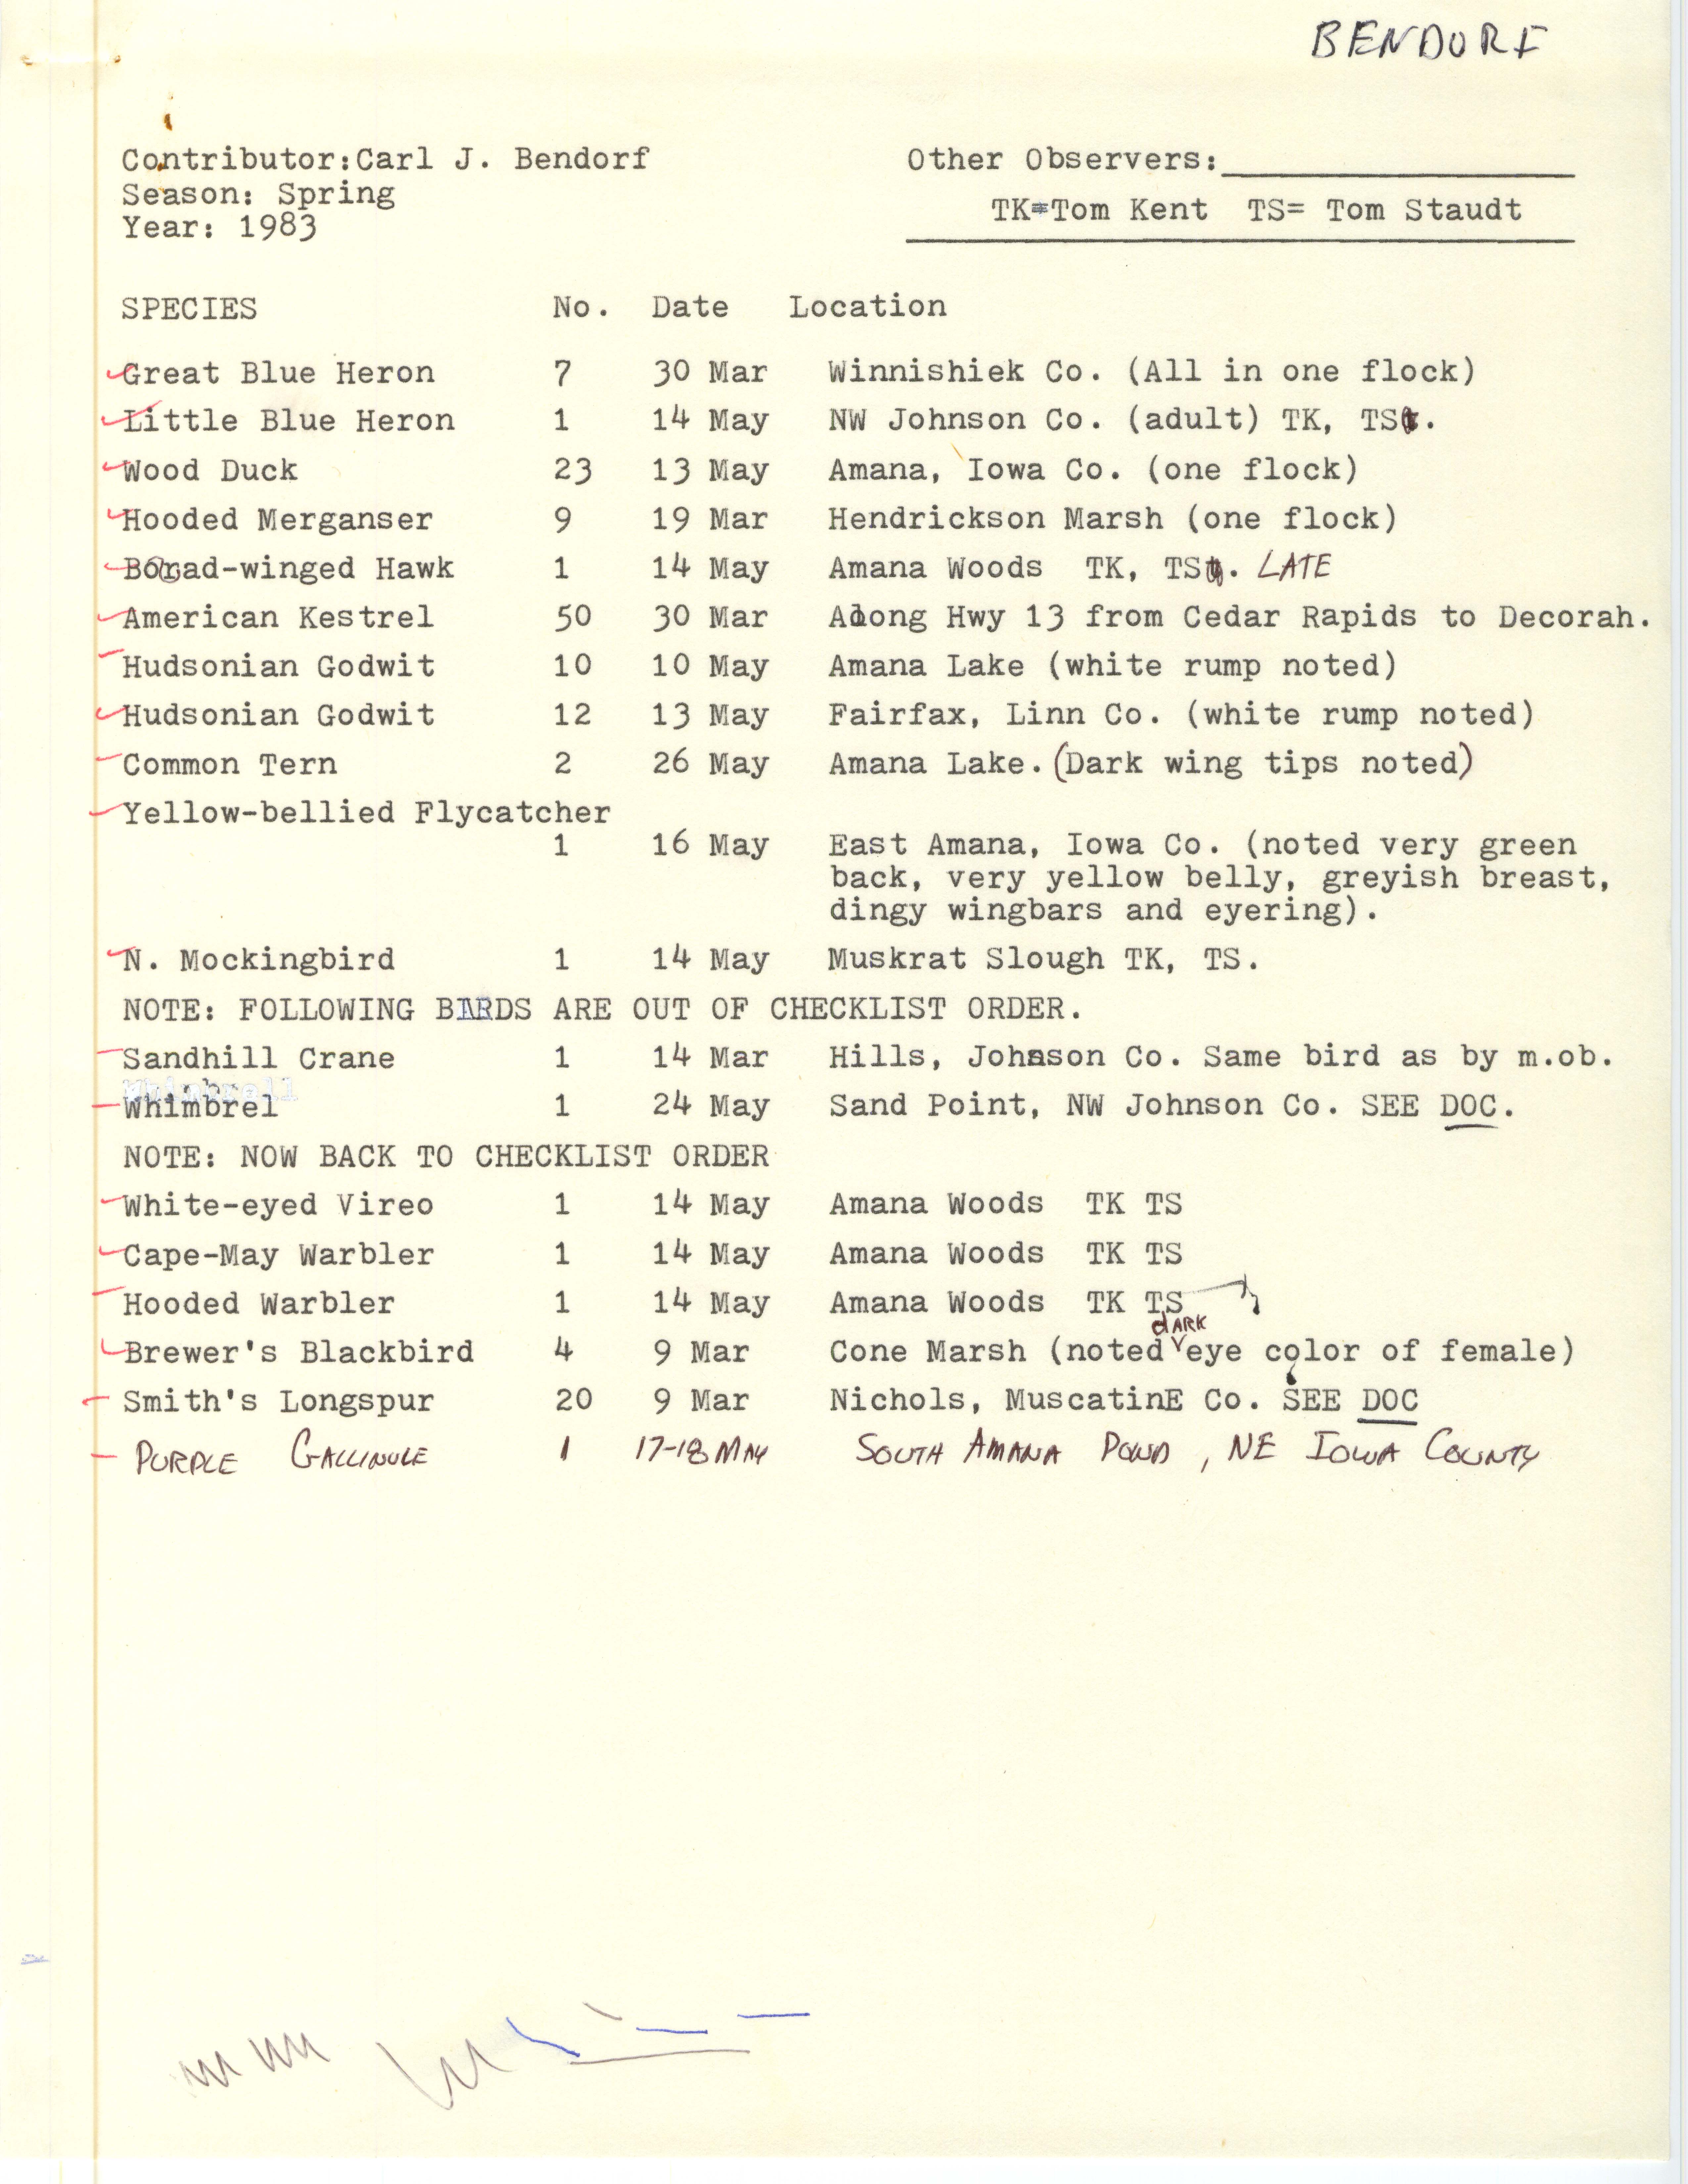 Field notes contributed by Carl J. Bendorf, spring 1983